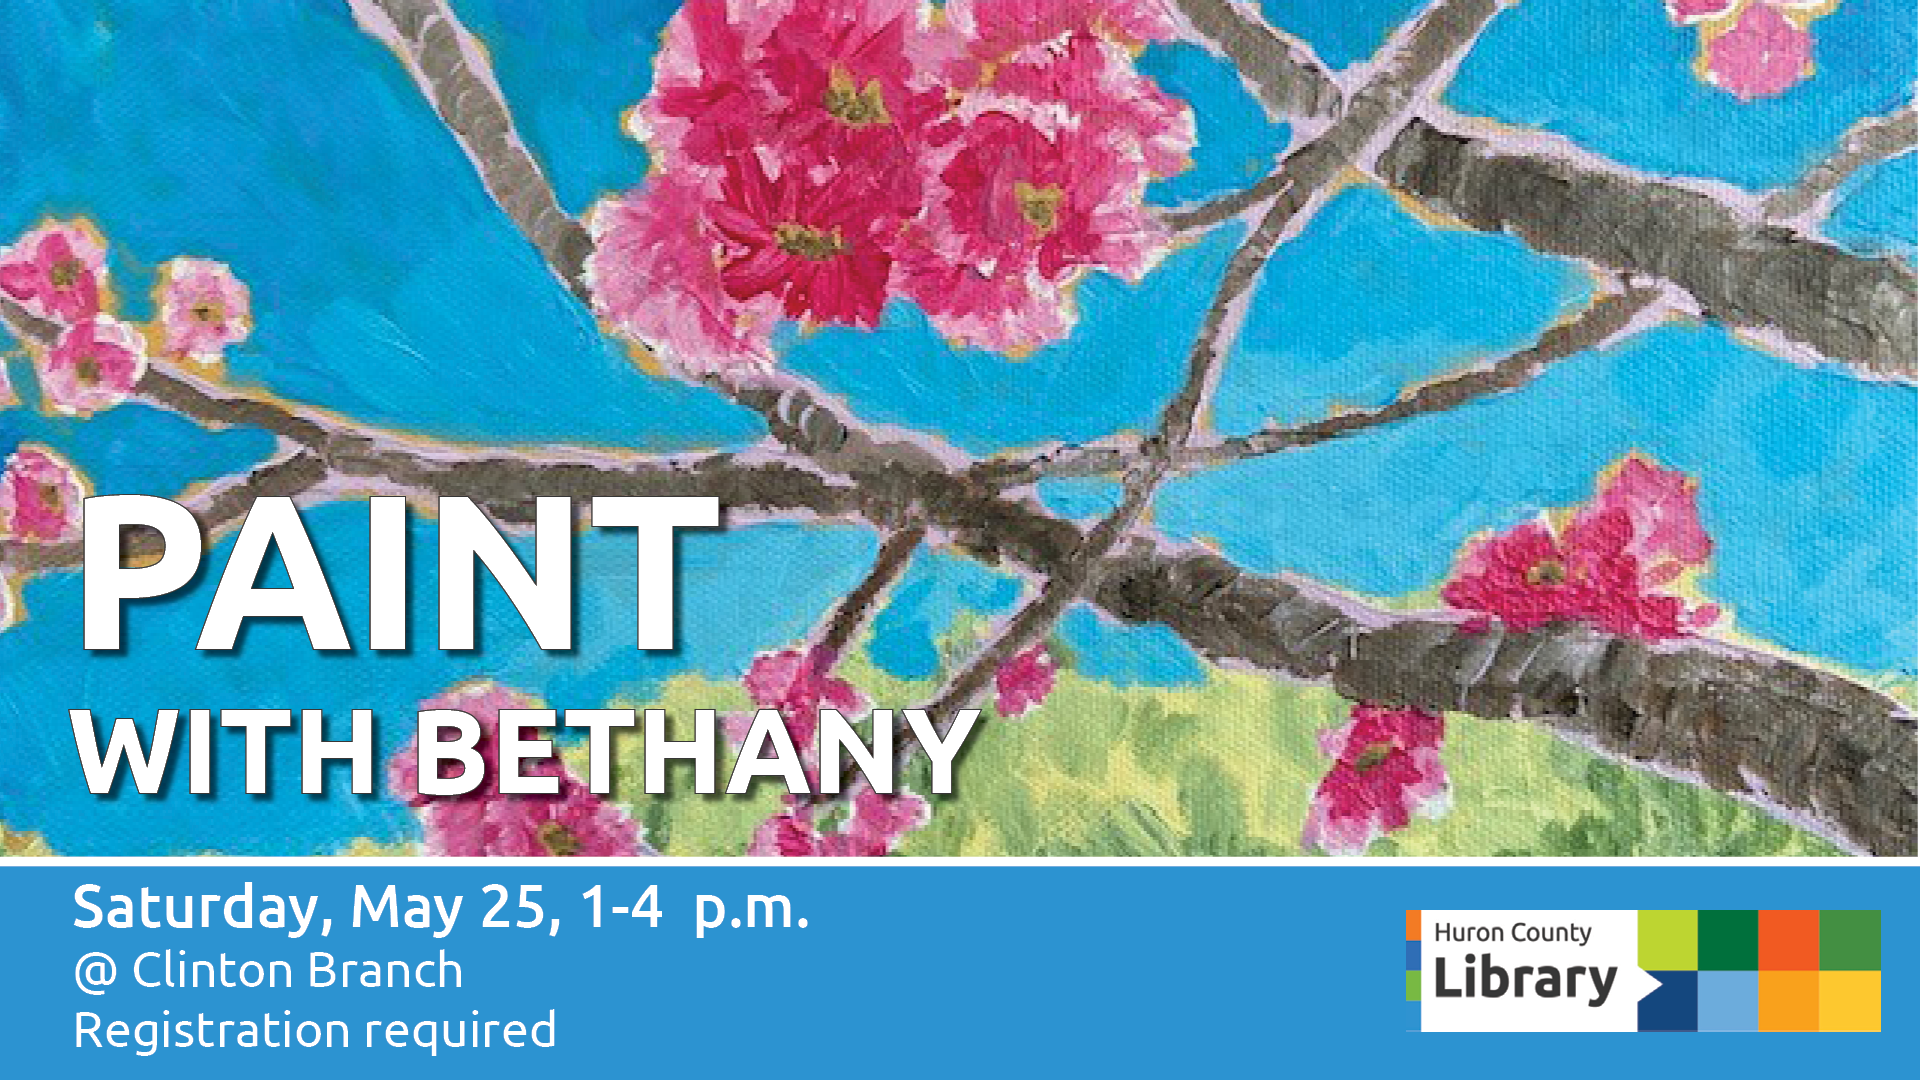 Painting of tree blossoms with text promoting Paint with Bethany at Clinton